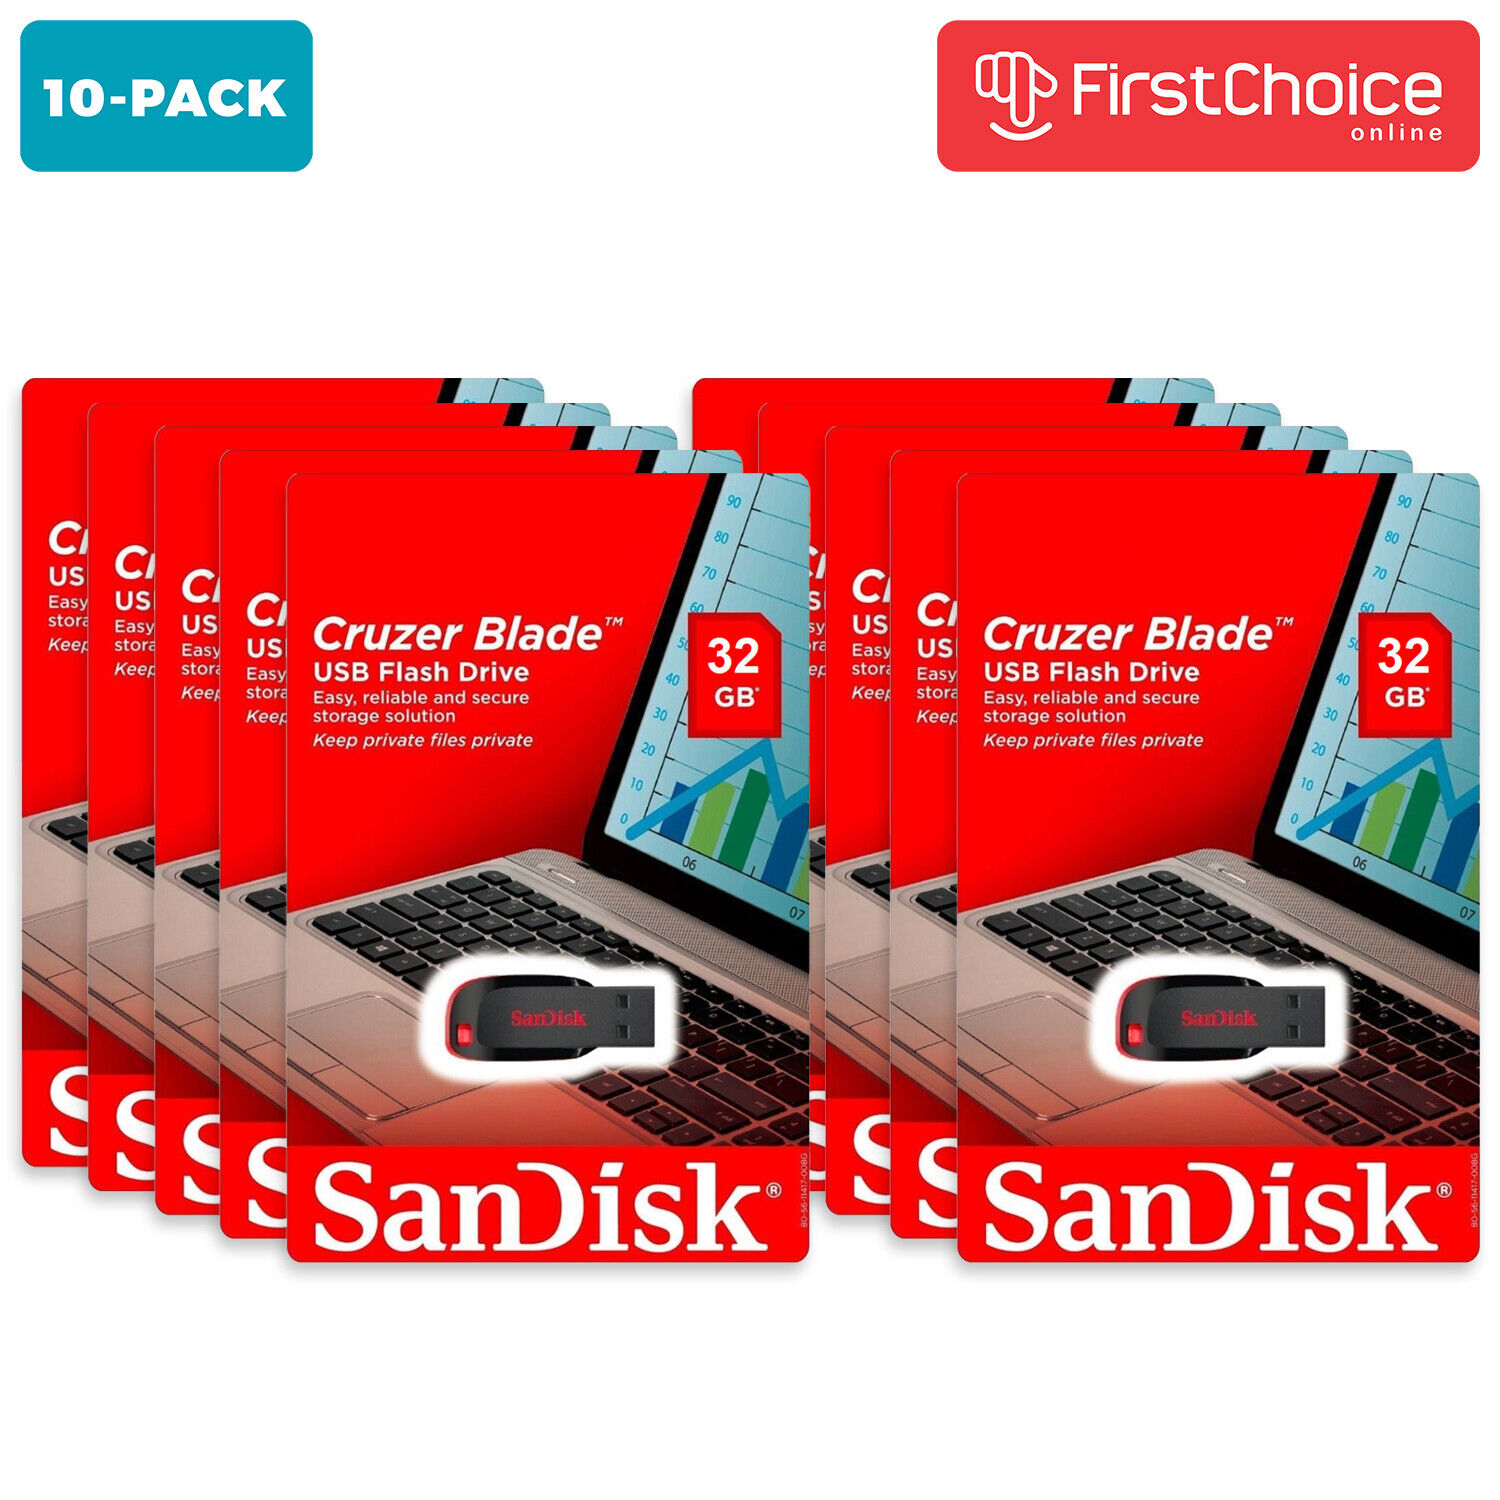 SanDisk 32GB Cruzer Blade USB Flash Drive Thumb Memory Stick Pack of 10 - By Lot